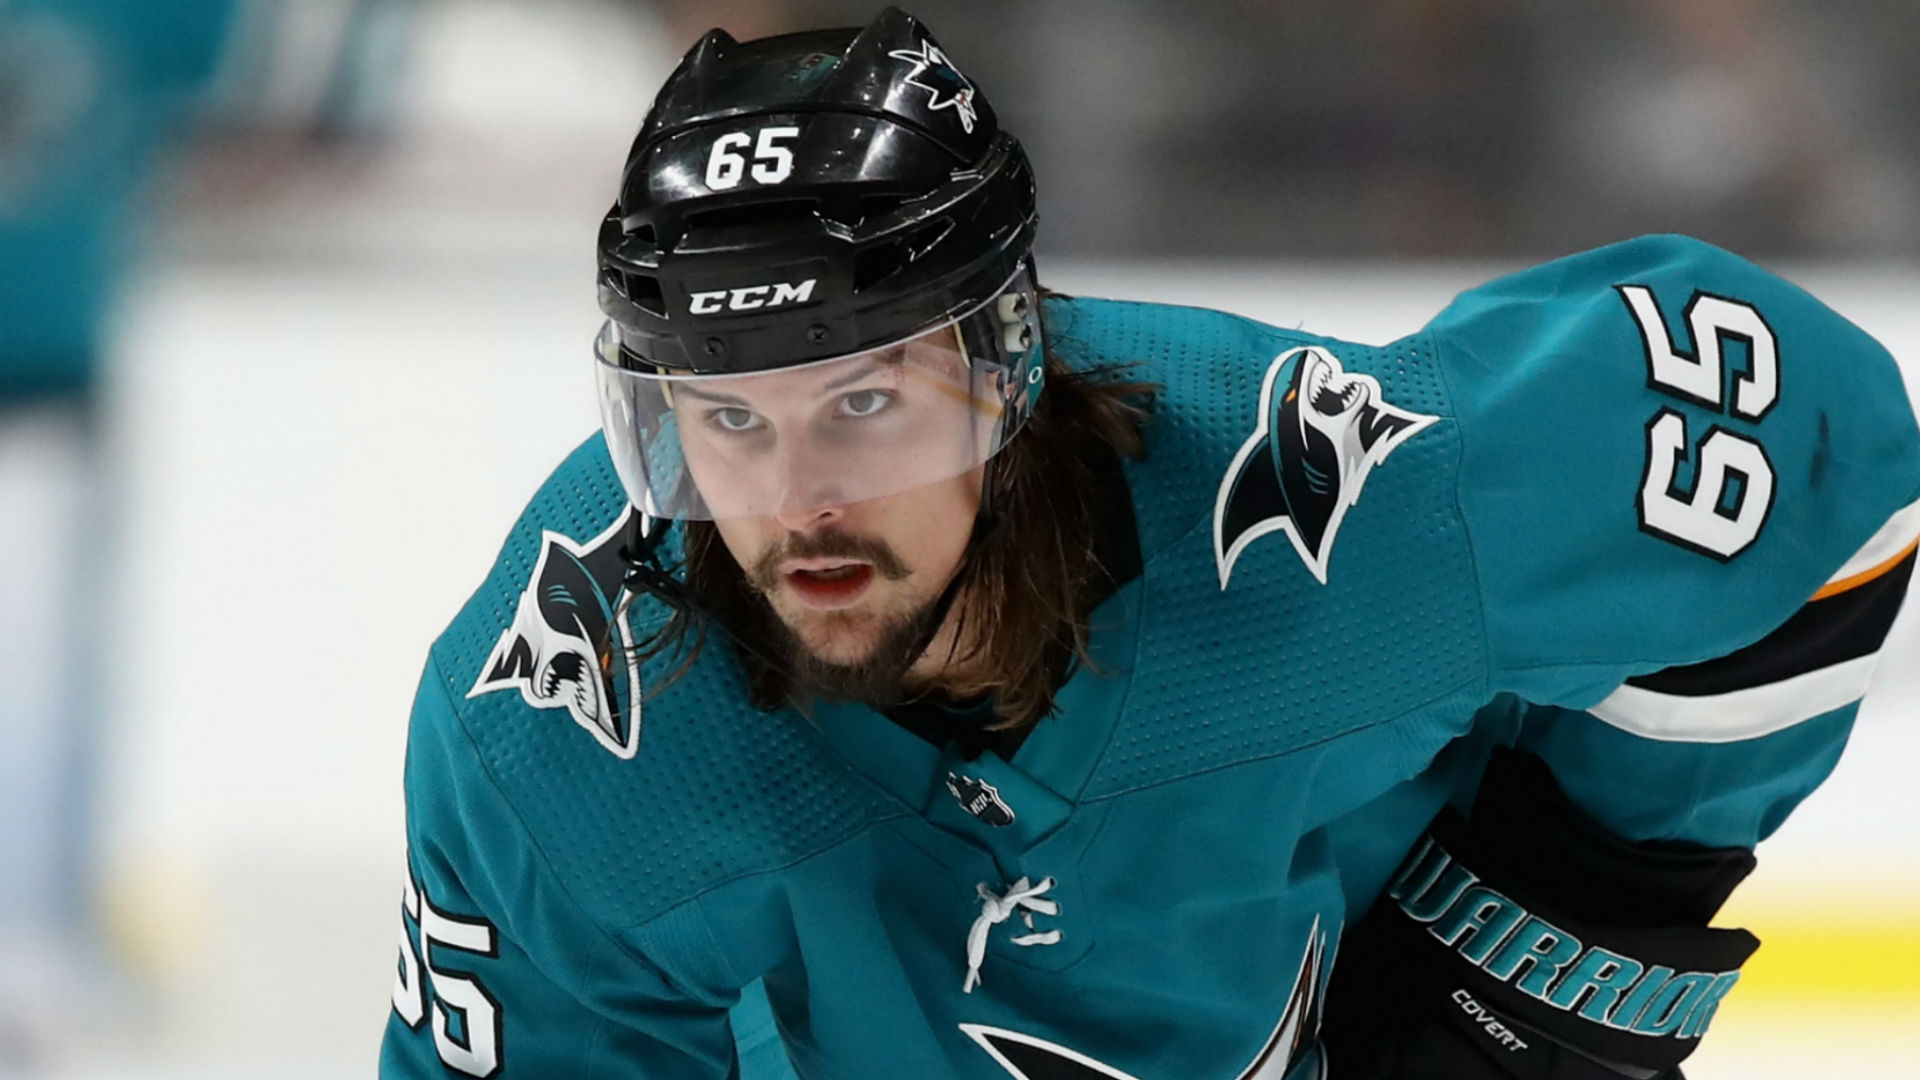 Nhl Rumor Roundup Could The Rangers Make A Move For Erik Karlsson